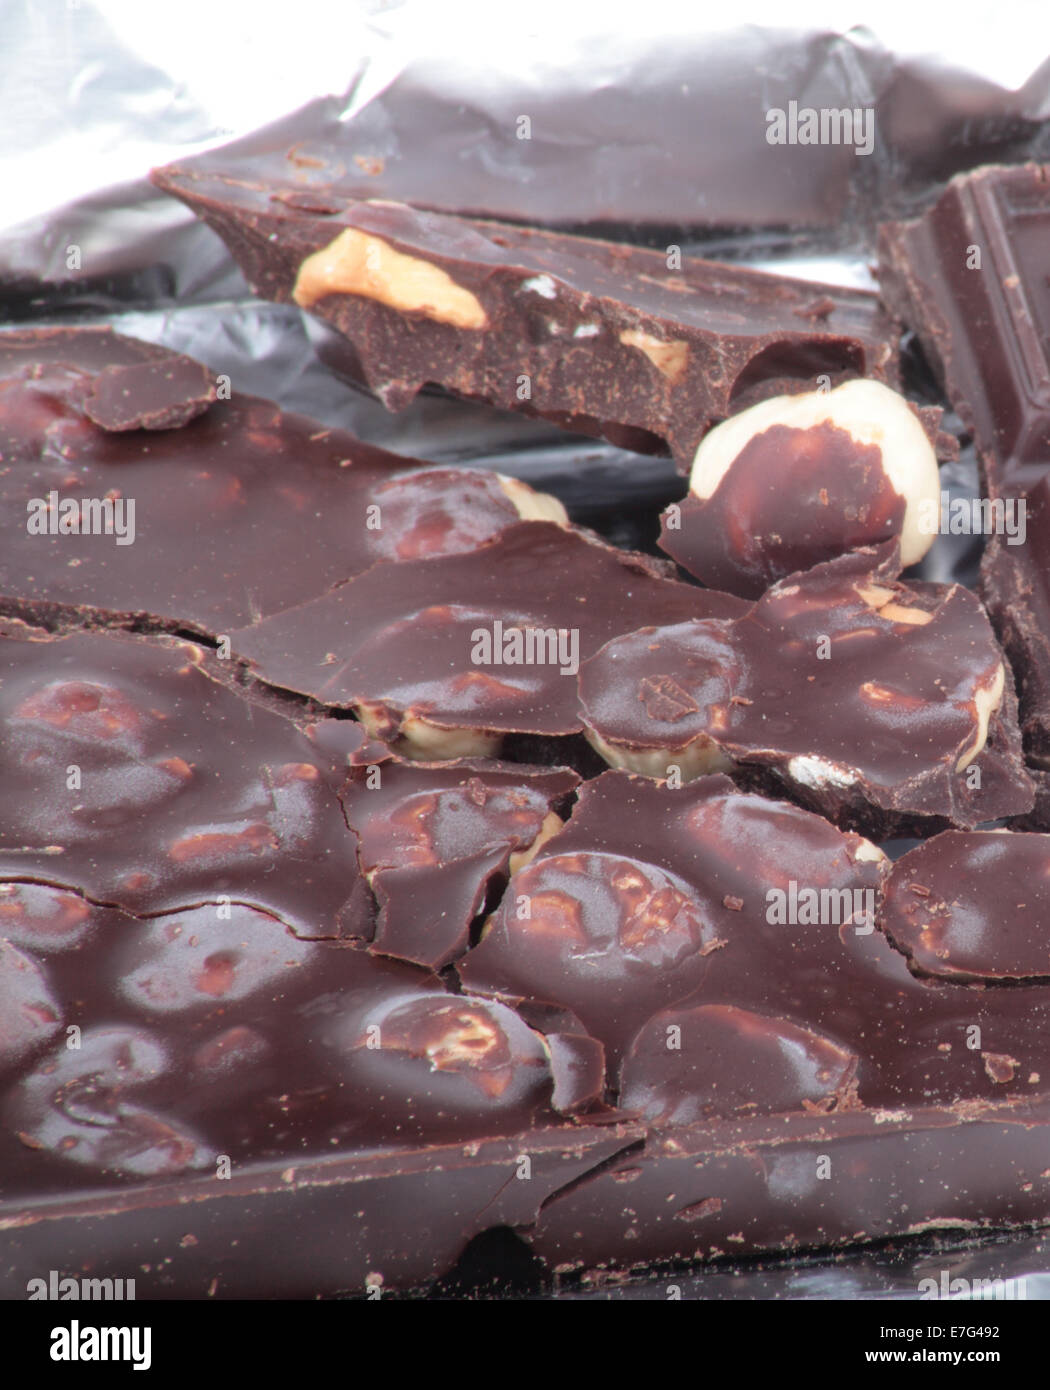 bar of brown chocolate in foil Stock Photo